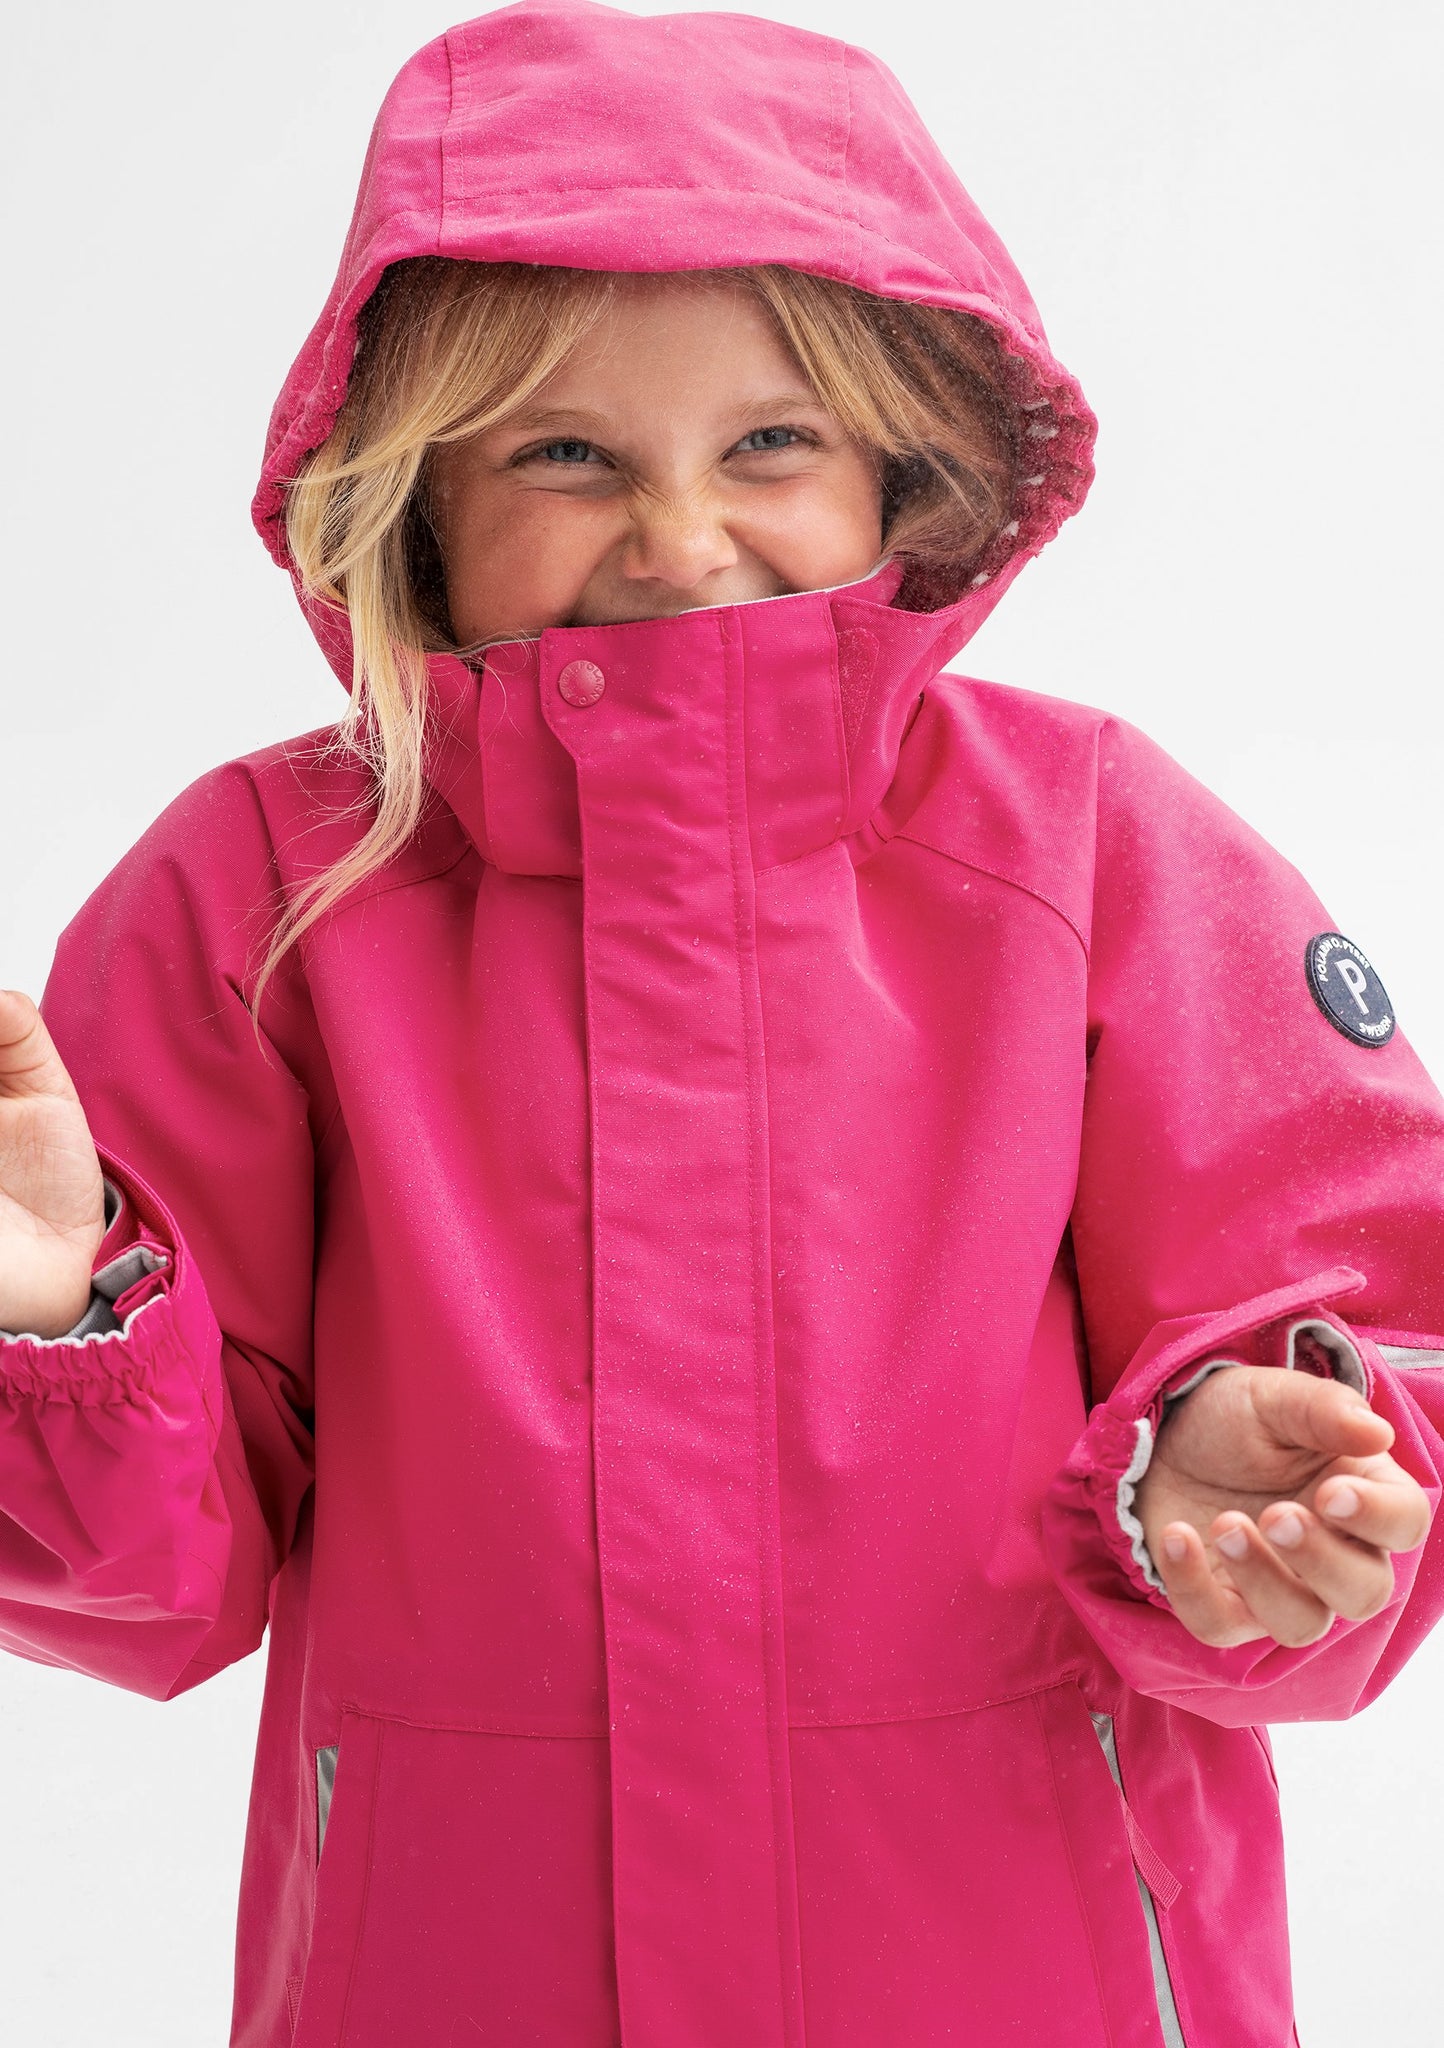 A young girl wearing a pink, kids waterproof jacket with detachable hood and adjustable cuffs, made of soft shell fabric.